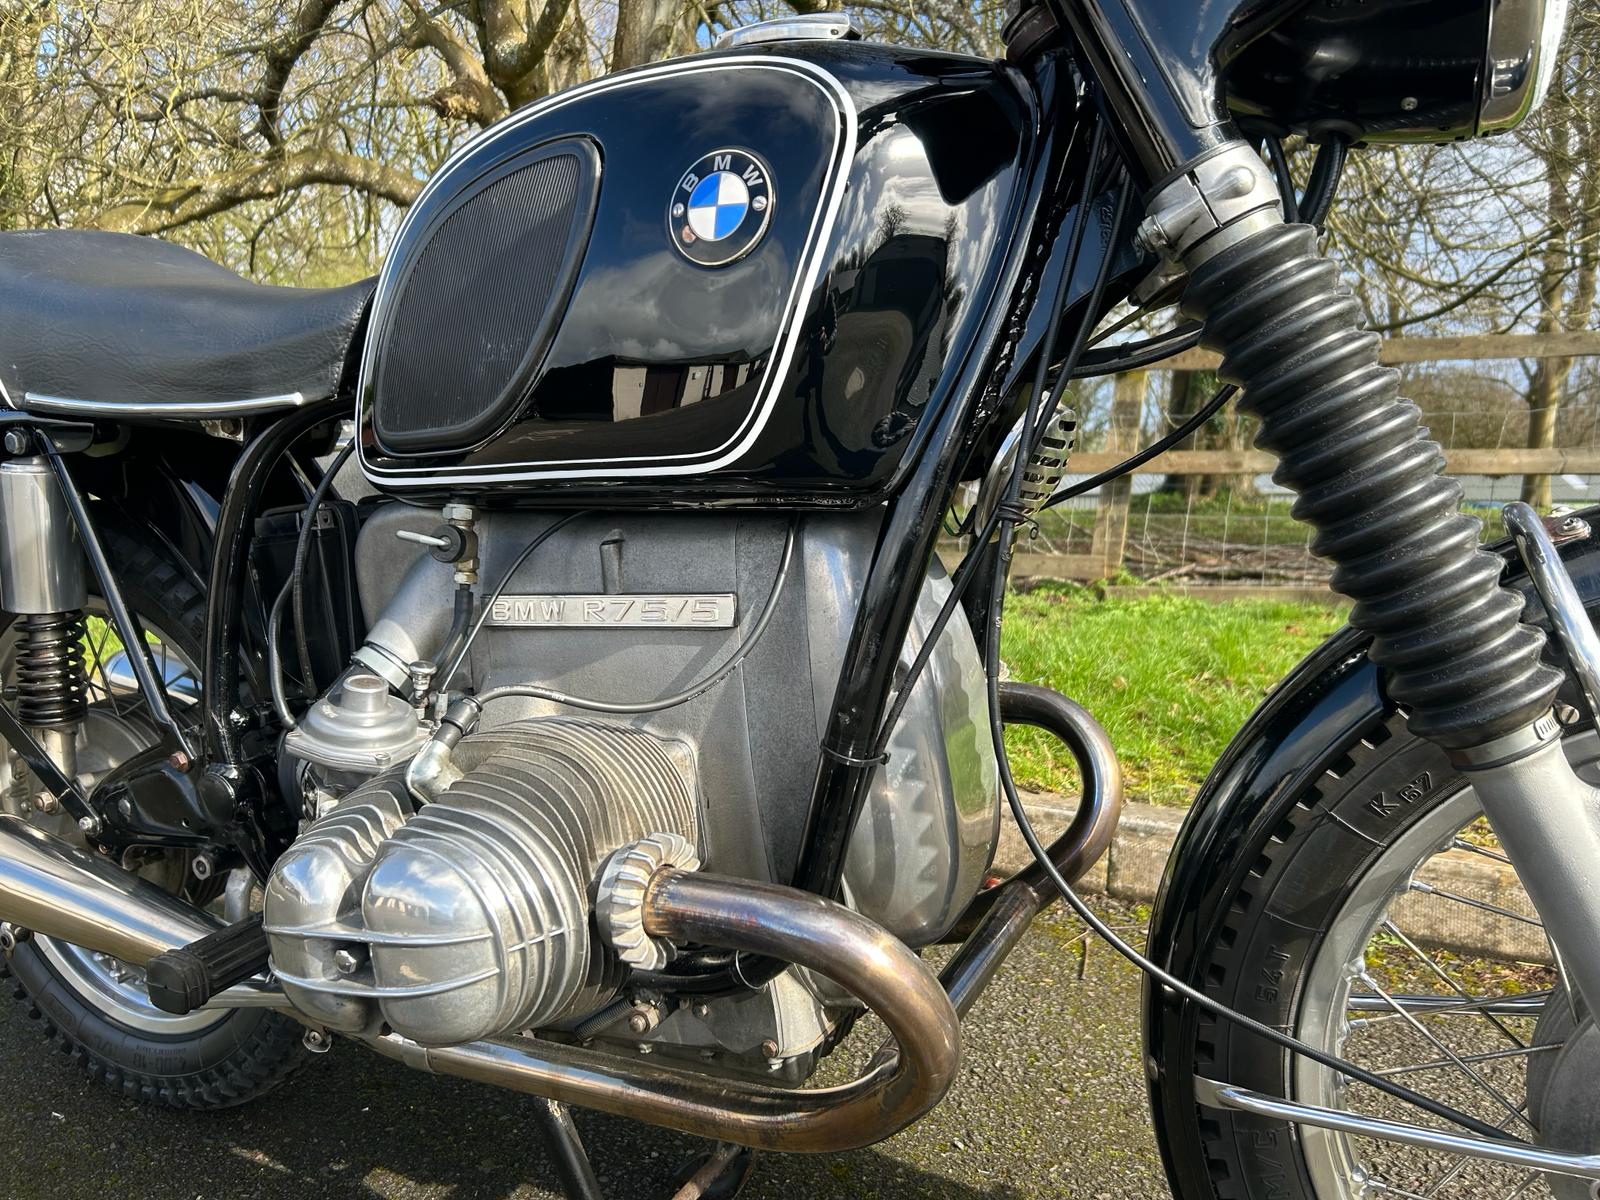 A BMW R75/5 MOTORCYCLE .1971. 72452 MILES. EXCELLENT WELL RESTORED CONDITION, V5, MOT AND TAX - Image 17 of 17